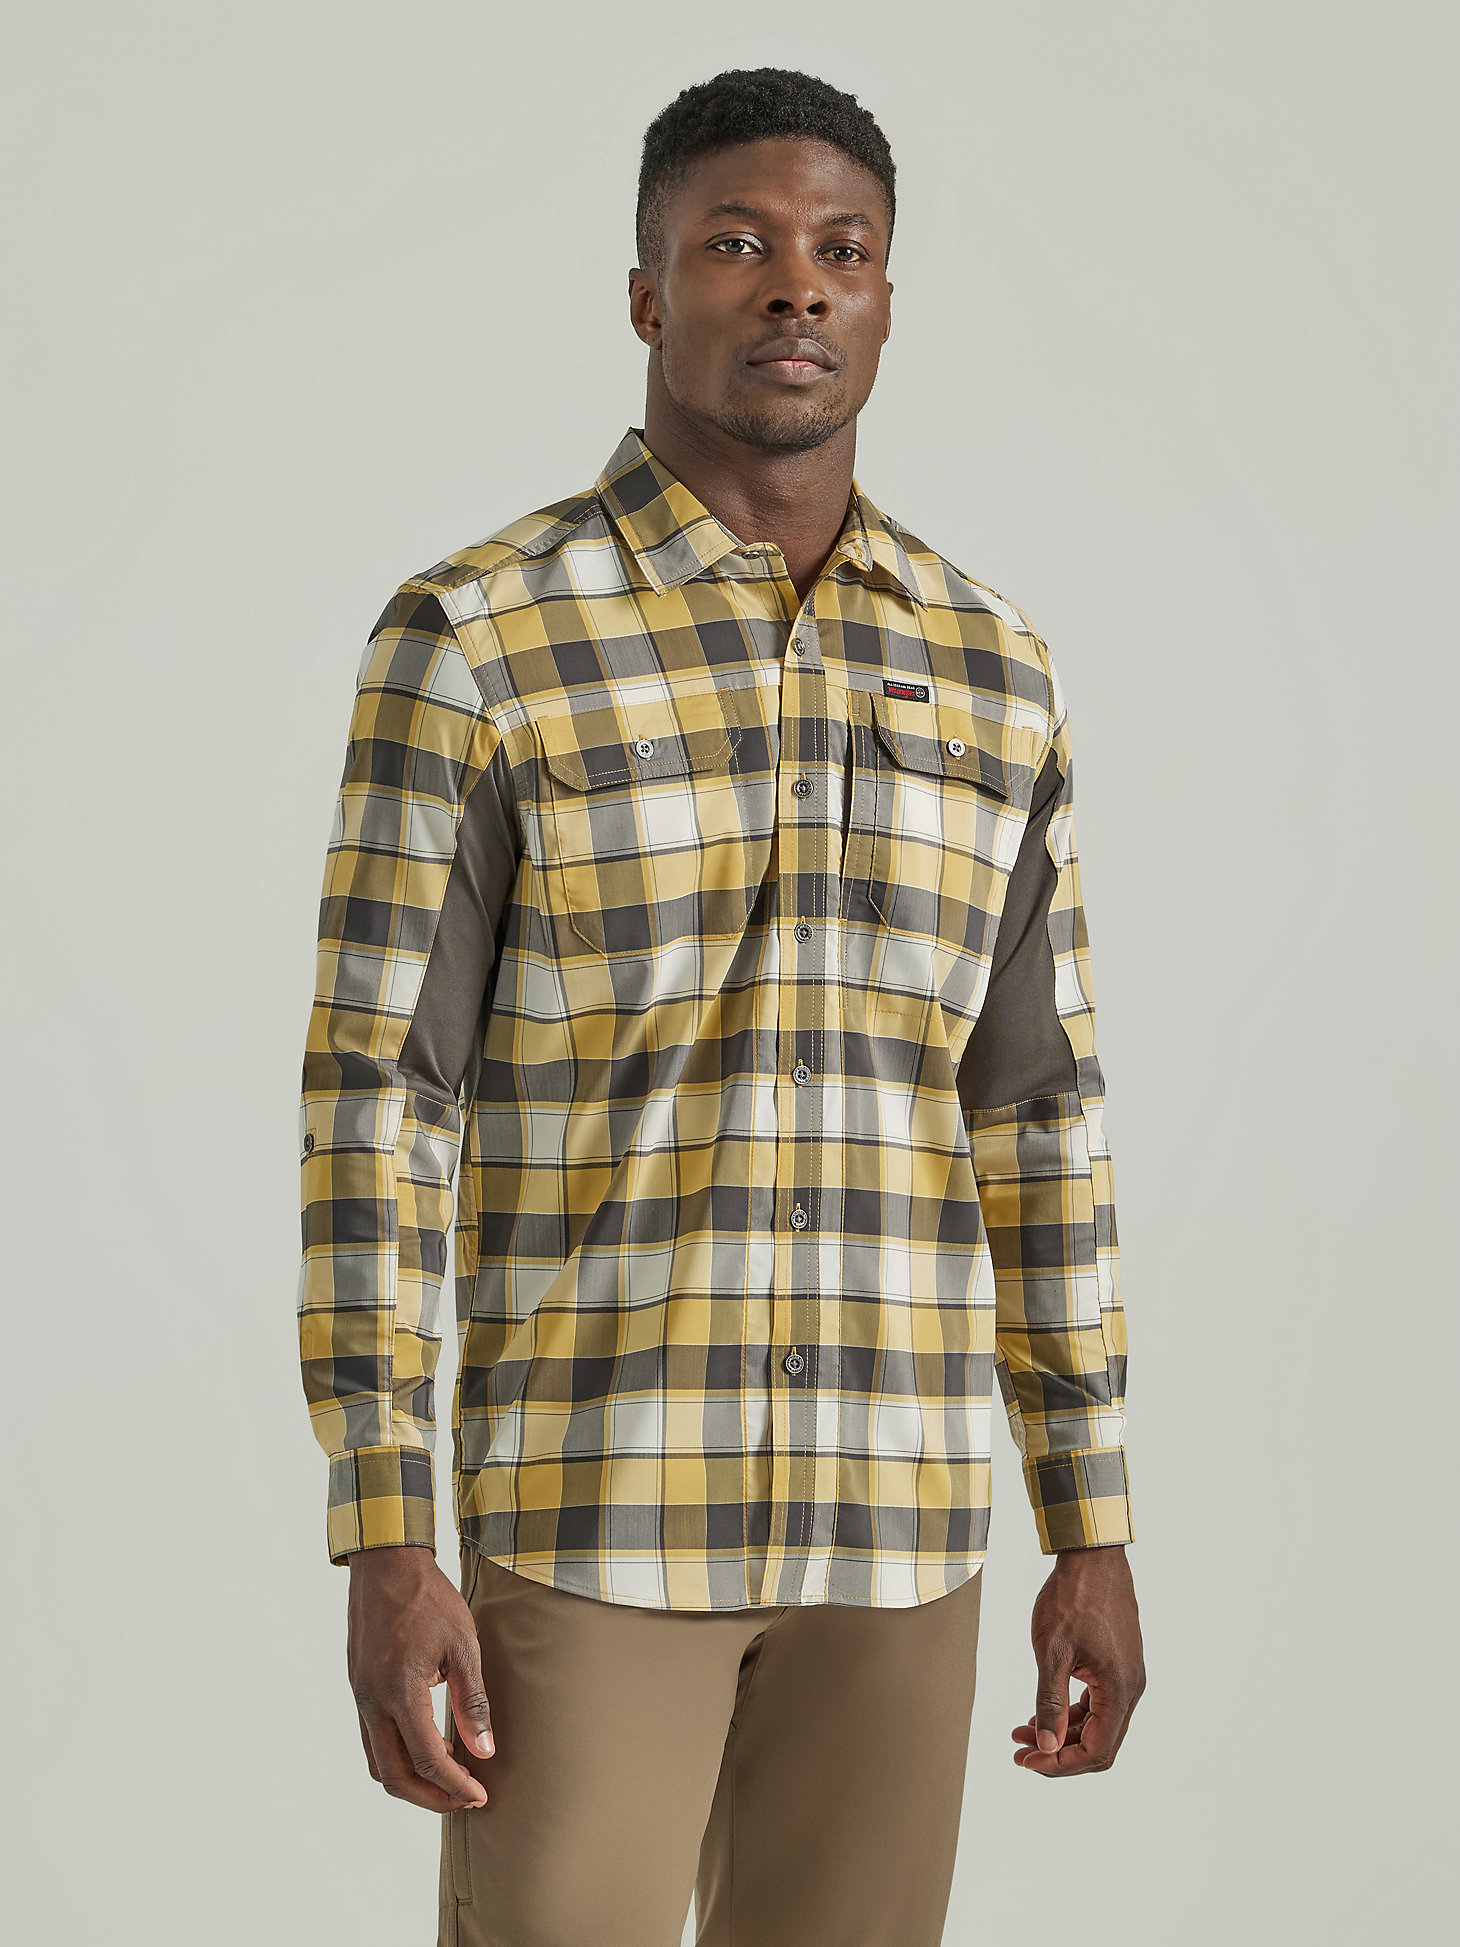 ATG By Wrangler™ Plaid Mixed Material Shirt in Travertine main view